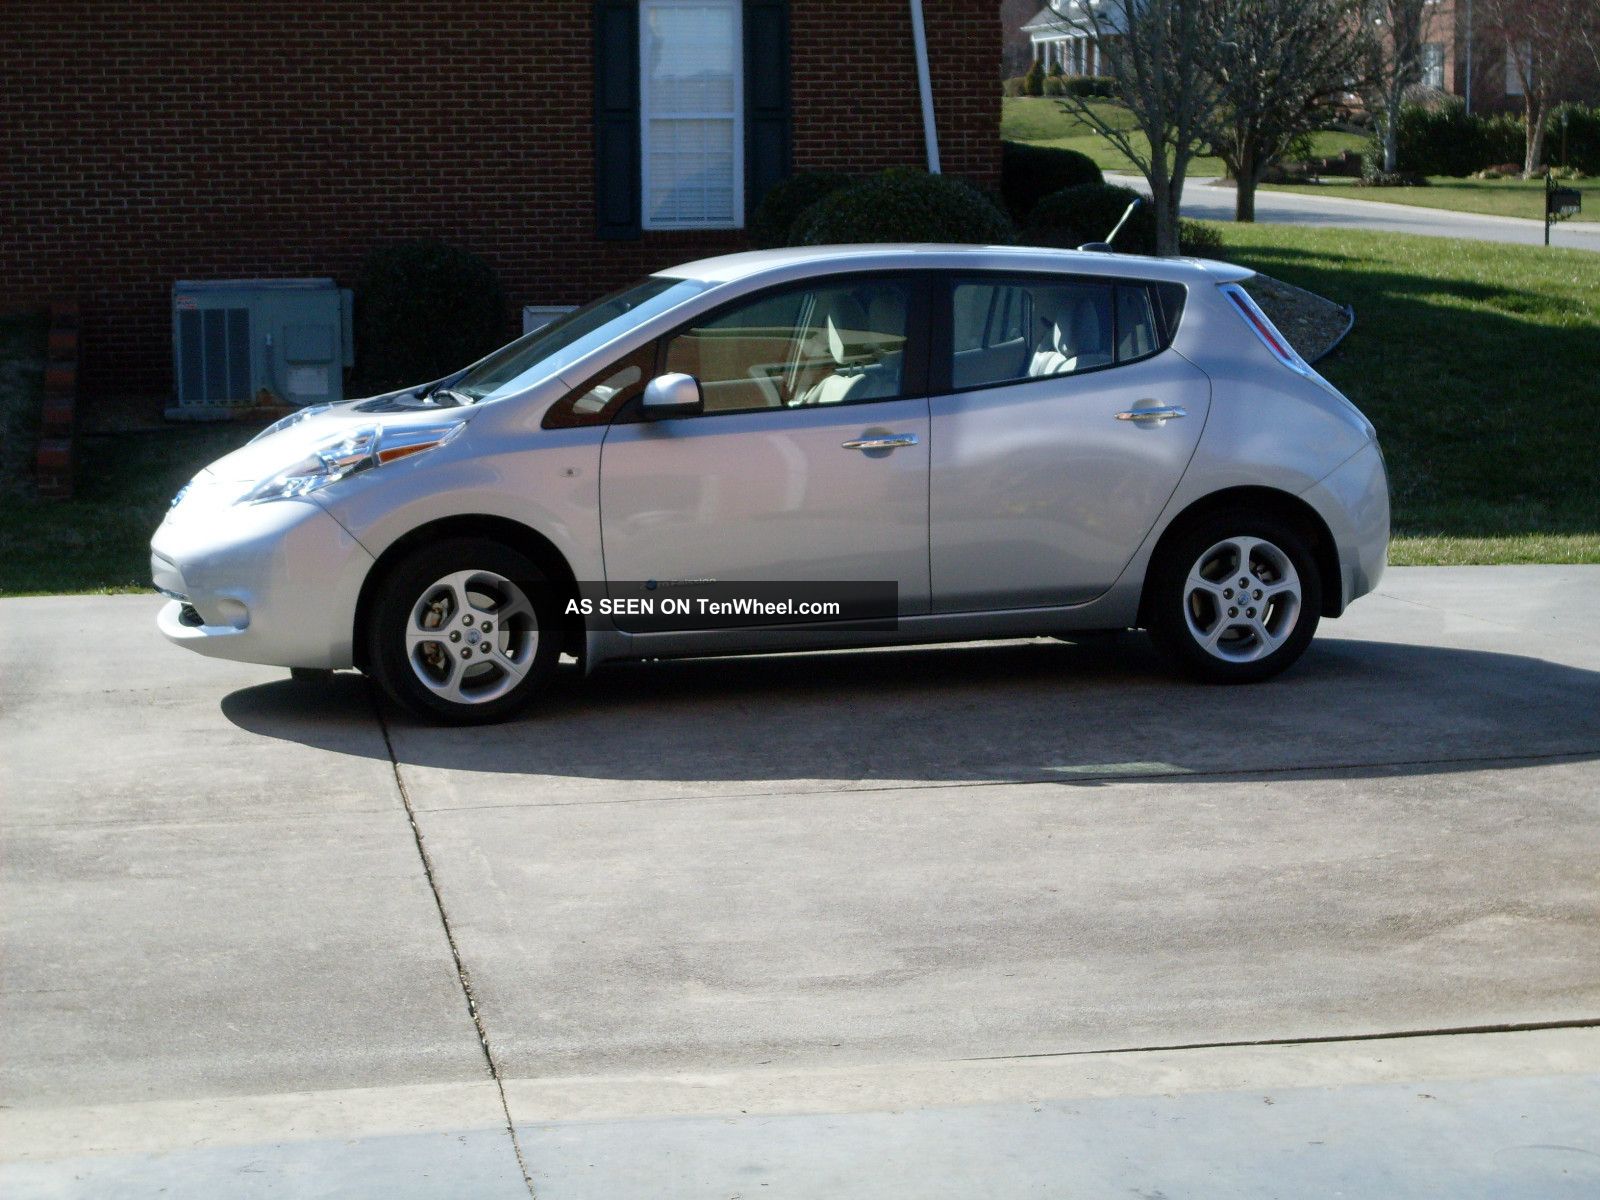 Nissan leaf in cold weather #4